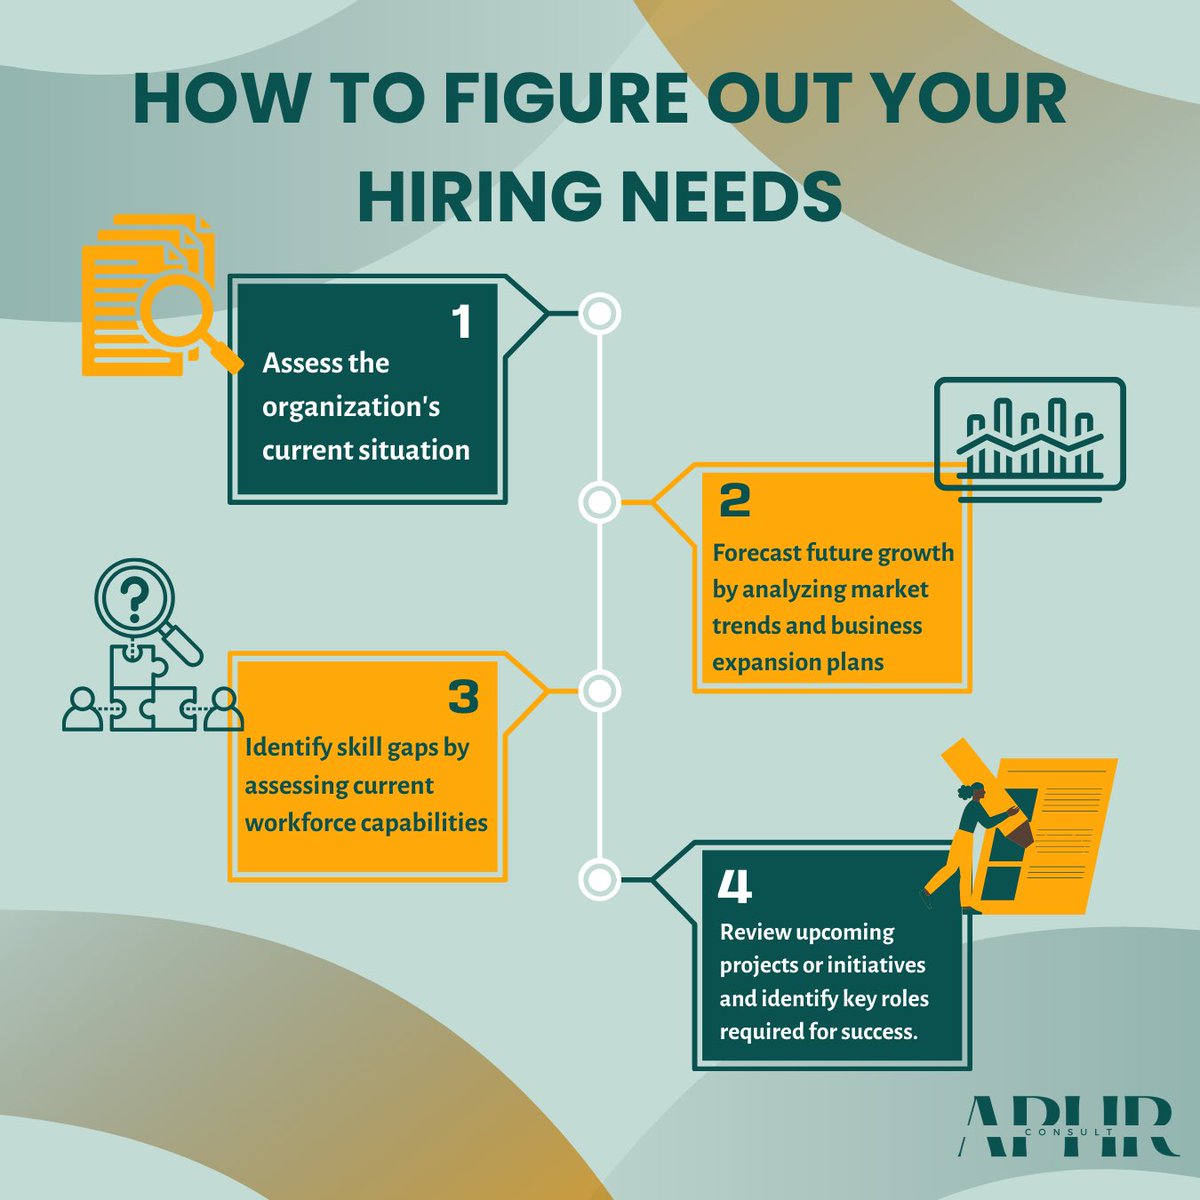 To ensure successful recruitment outcomes, it's crucial to have a clear understanding of your hiring needs. 👥 Send us a message or click the link in bio for a free consultation call ☎️💯 #aphrconsult #recruitment #hiring #humanresources #HRinlagos